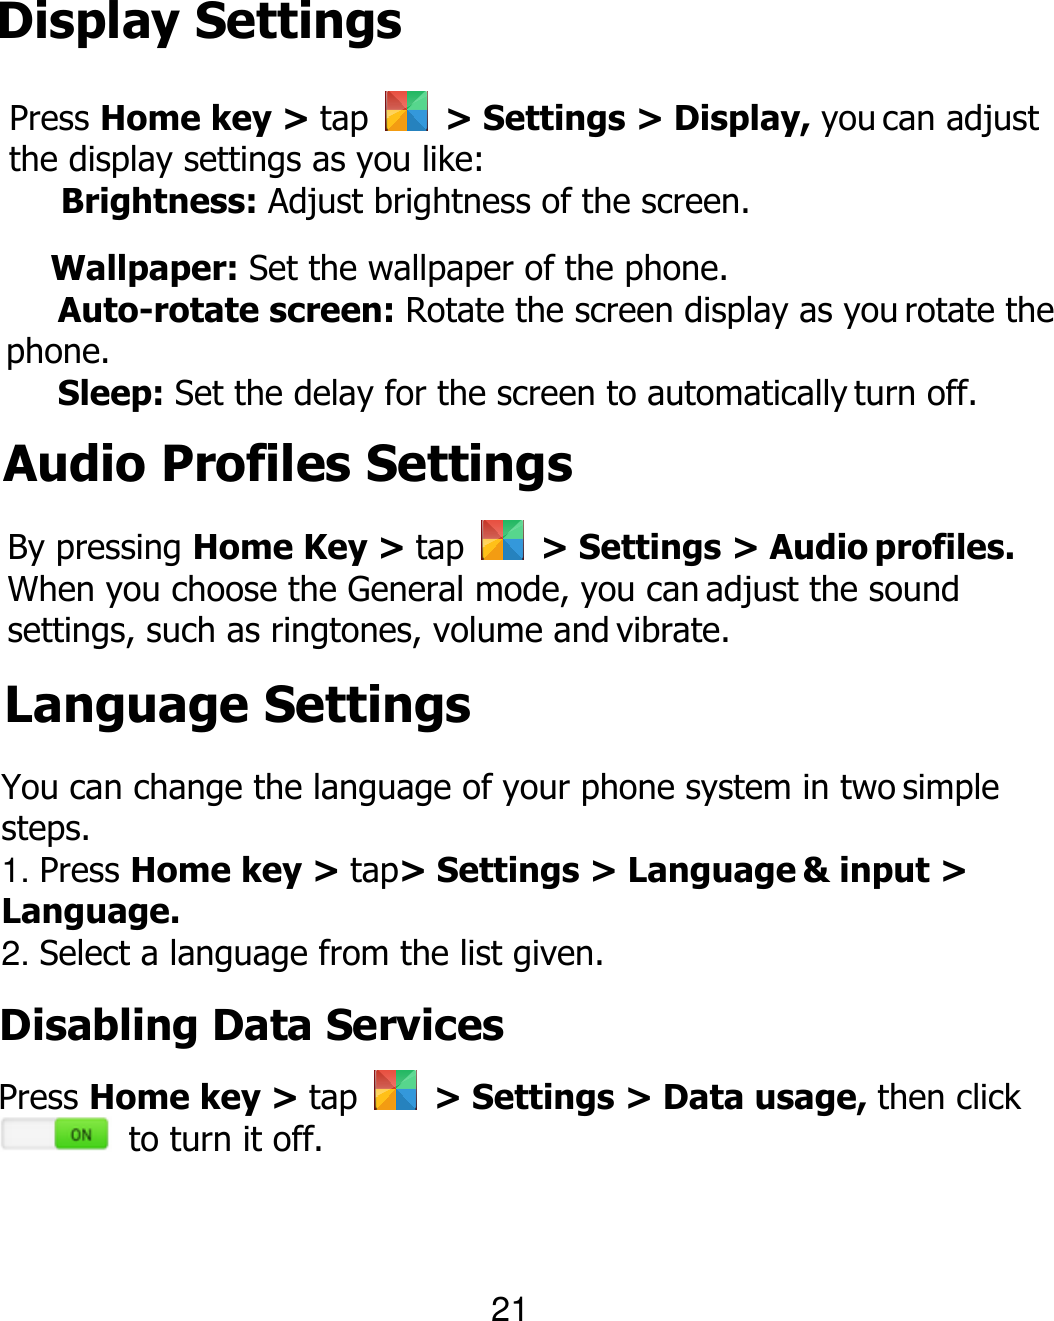 Display Settings Press Home key &gt; tap    &gt; Settings &gt; Display, you can adjust the display settings as you like:  Brightness: Adjust brightness of the screen.  Wallpaper: Set the wallpaper of the phone.   Auto-rotate screen: Rotate the screen display as you rotate the phone.  Sleep: Set the delay for the screen to automatically turn off. 21 Audio Profiles Settings By pressing Home Key &gt; tap    &gt; Settings &gt; Audio profiles. When you choose the General mode, you can adjust the sound settings, such as ringtones, volume and vibrate. Language Settings You can change the language of your phone system in two simple steps. 1. Press Home key &gt; tap&gt; Settings &gt; Language &amp; input &gt; Language. 2. Select a language from the list given. Disabling Data Services Press Home key &gt; tap    &gt; Settings &gt; Data usage, then click   to turn it off. 